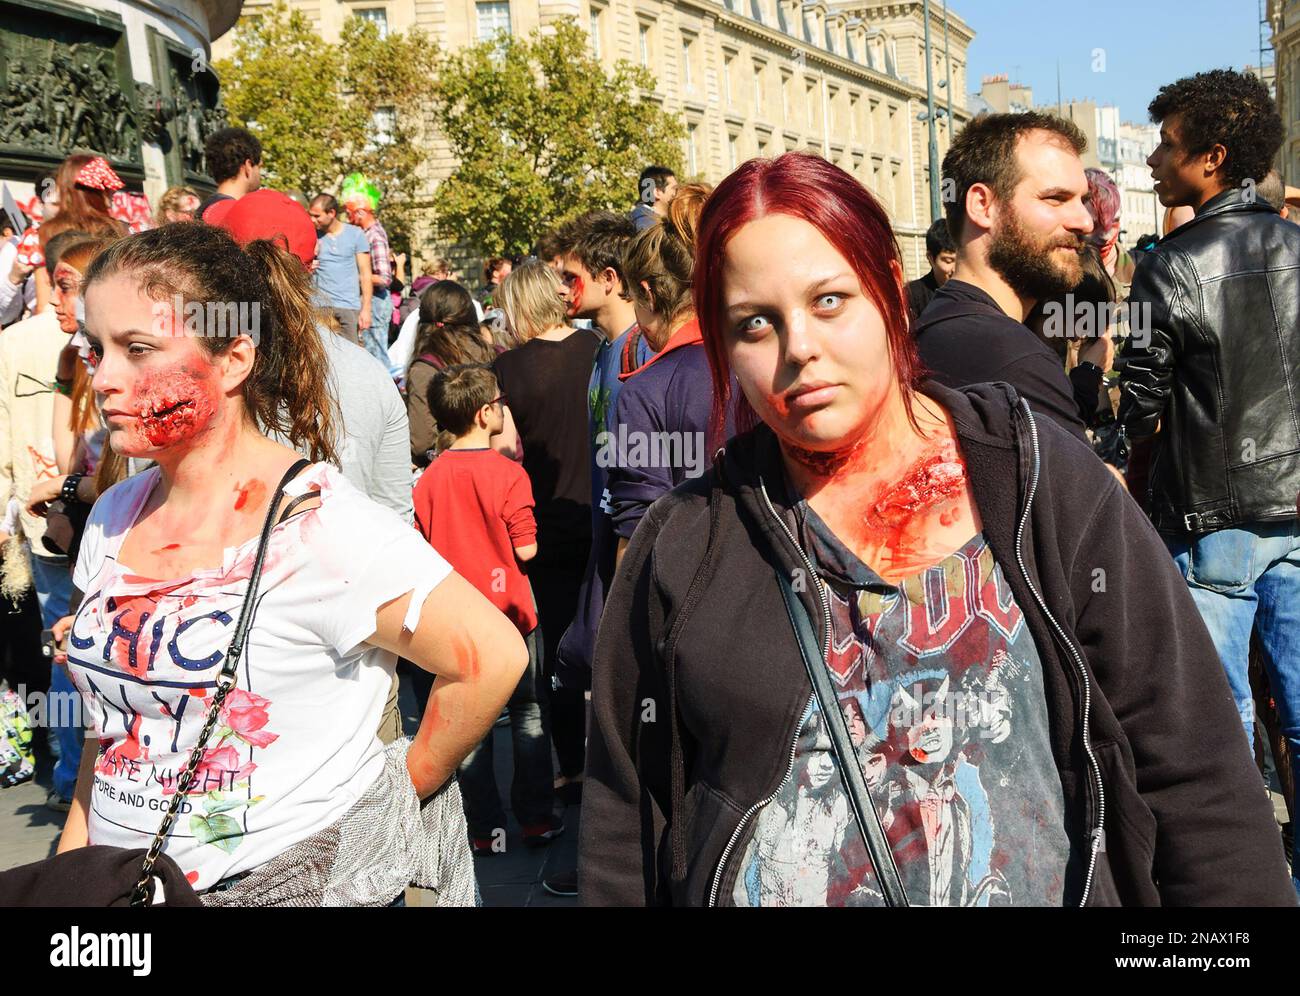 PARIS, FRANCE - OCTOBER 3, 2015: Two girls in zombie costume participating in Zombie parade at Place de la Republique. Zombie Walk is an annual event Stock Photo